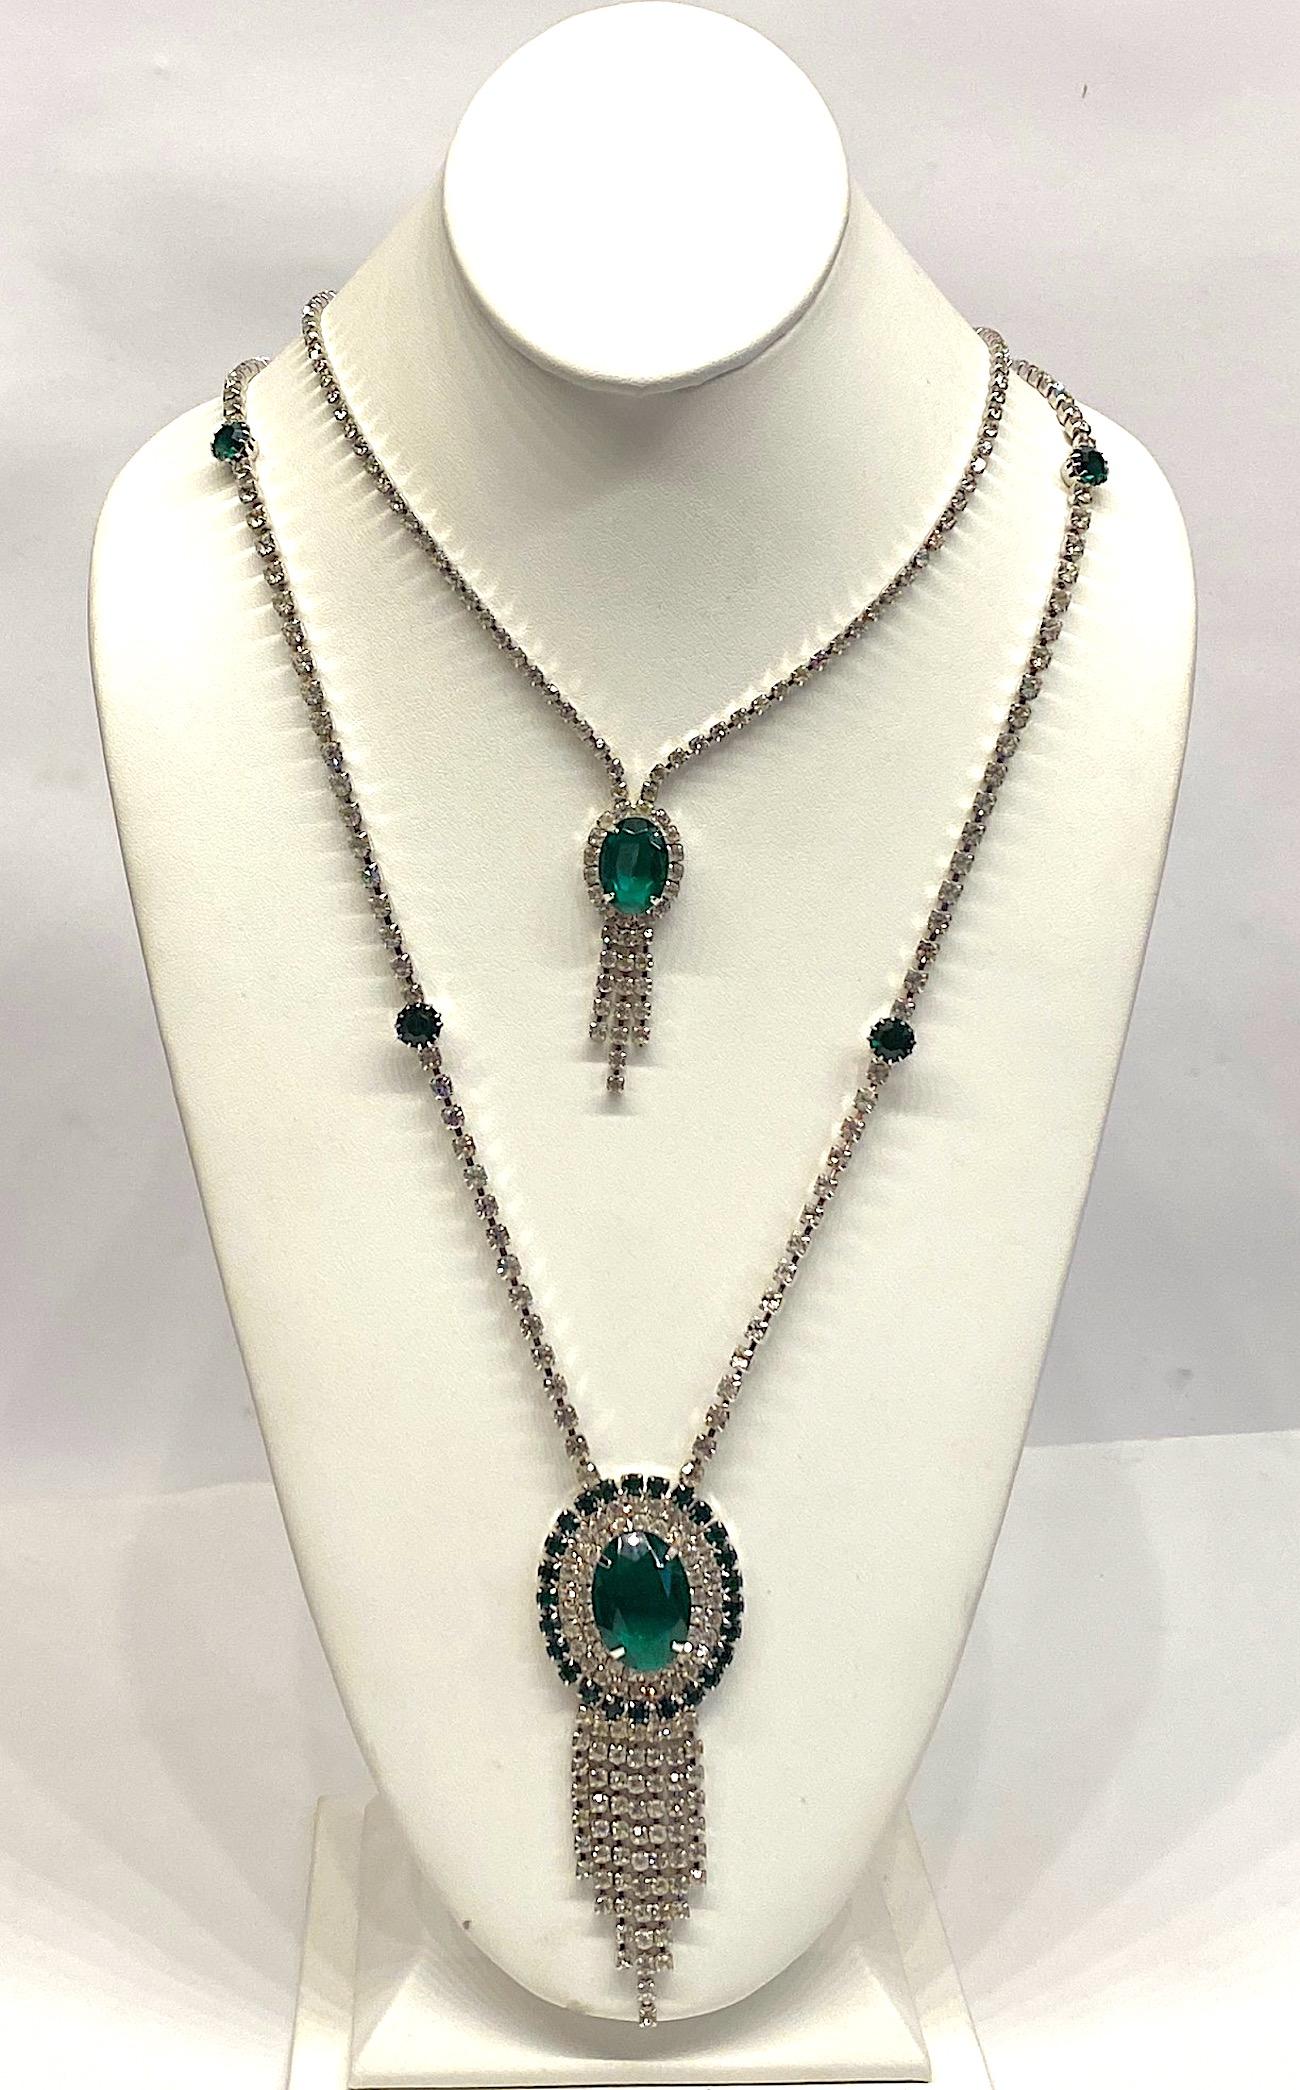 A late 1950s to mid 1960s long rhinestone double pendant necklace. The shorter stand is 18.75 inches long and has a .75 inch wide by 2 inch long pendant. The longer strand is 27 inches long and has a 1.5 inch wide by 3.88 inches long pendant. The